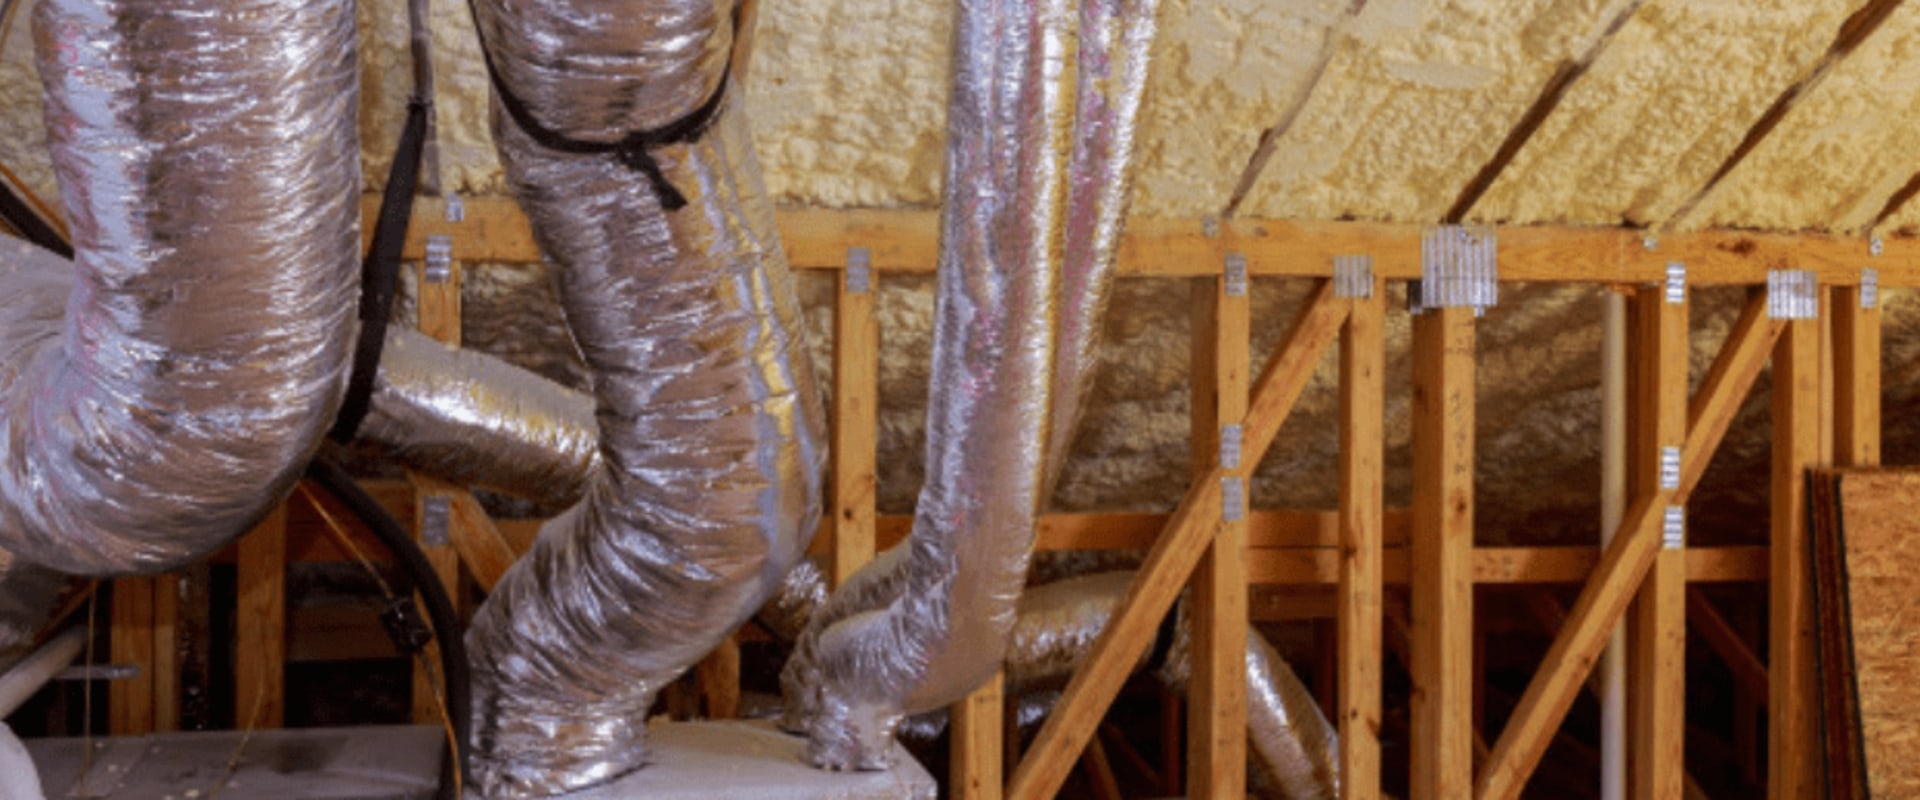 Aeroseal Air Duct Sealing: The Best Way to Improve Indoor Air Quality in Miami, Florida